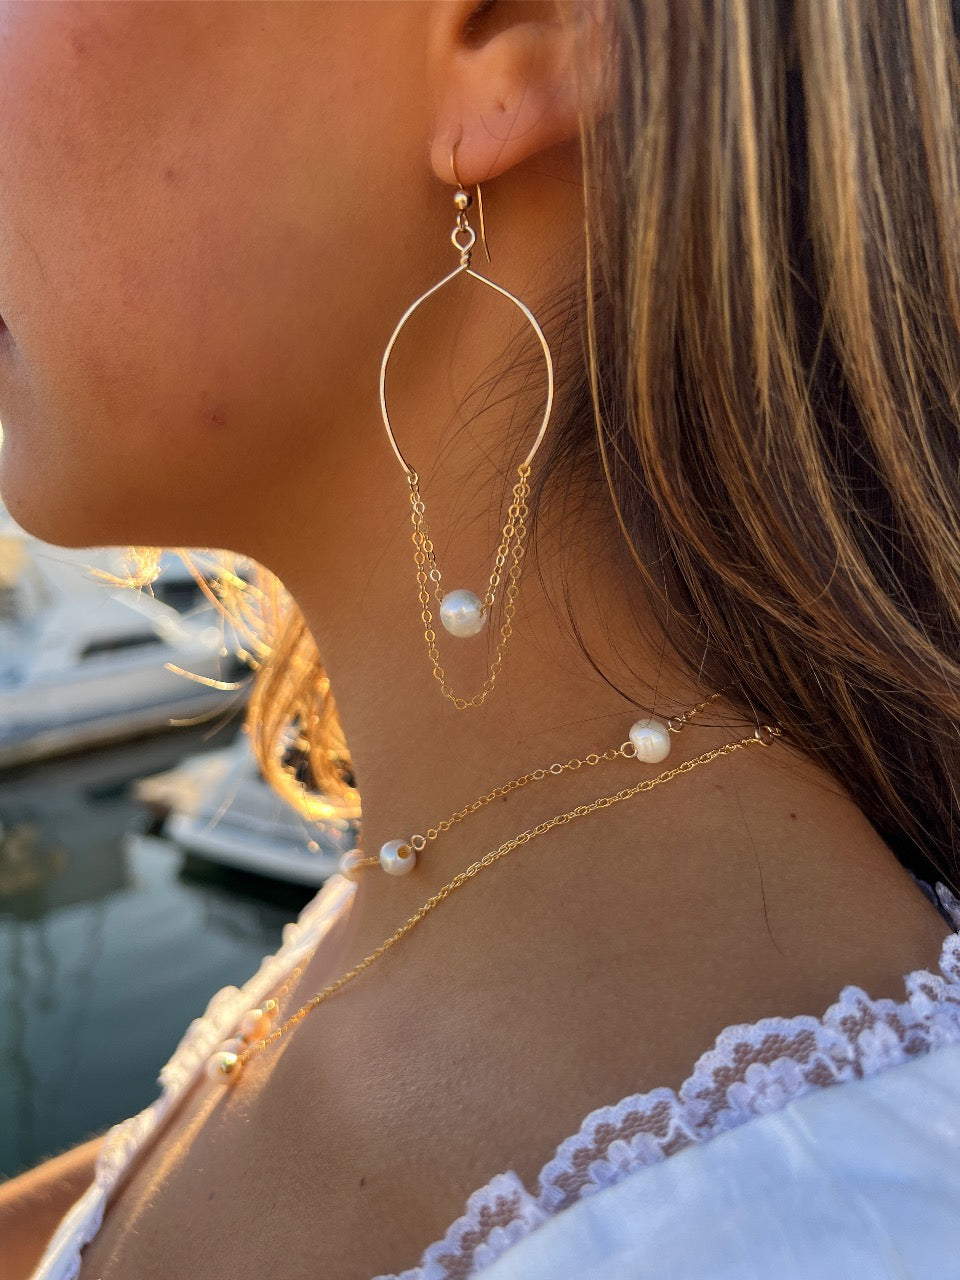 14k Gold Filled Arch Pearl & Chain Earrings + More Options